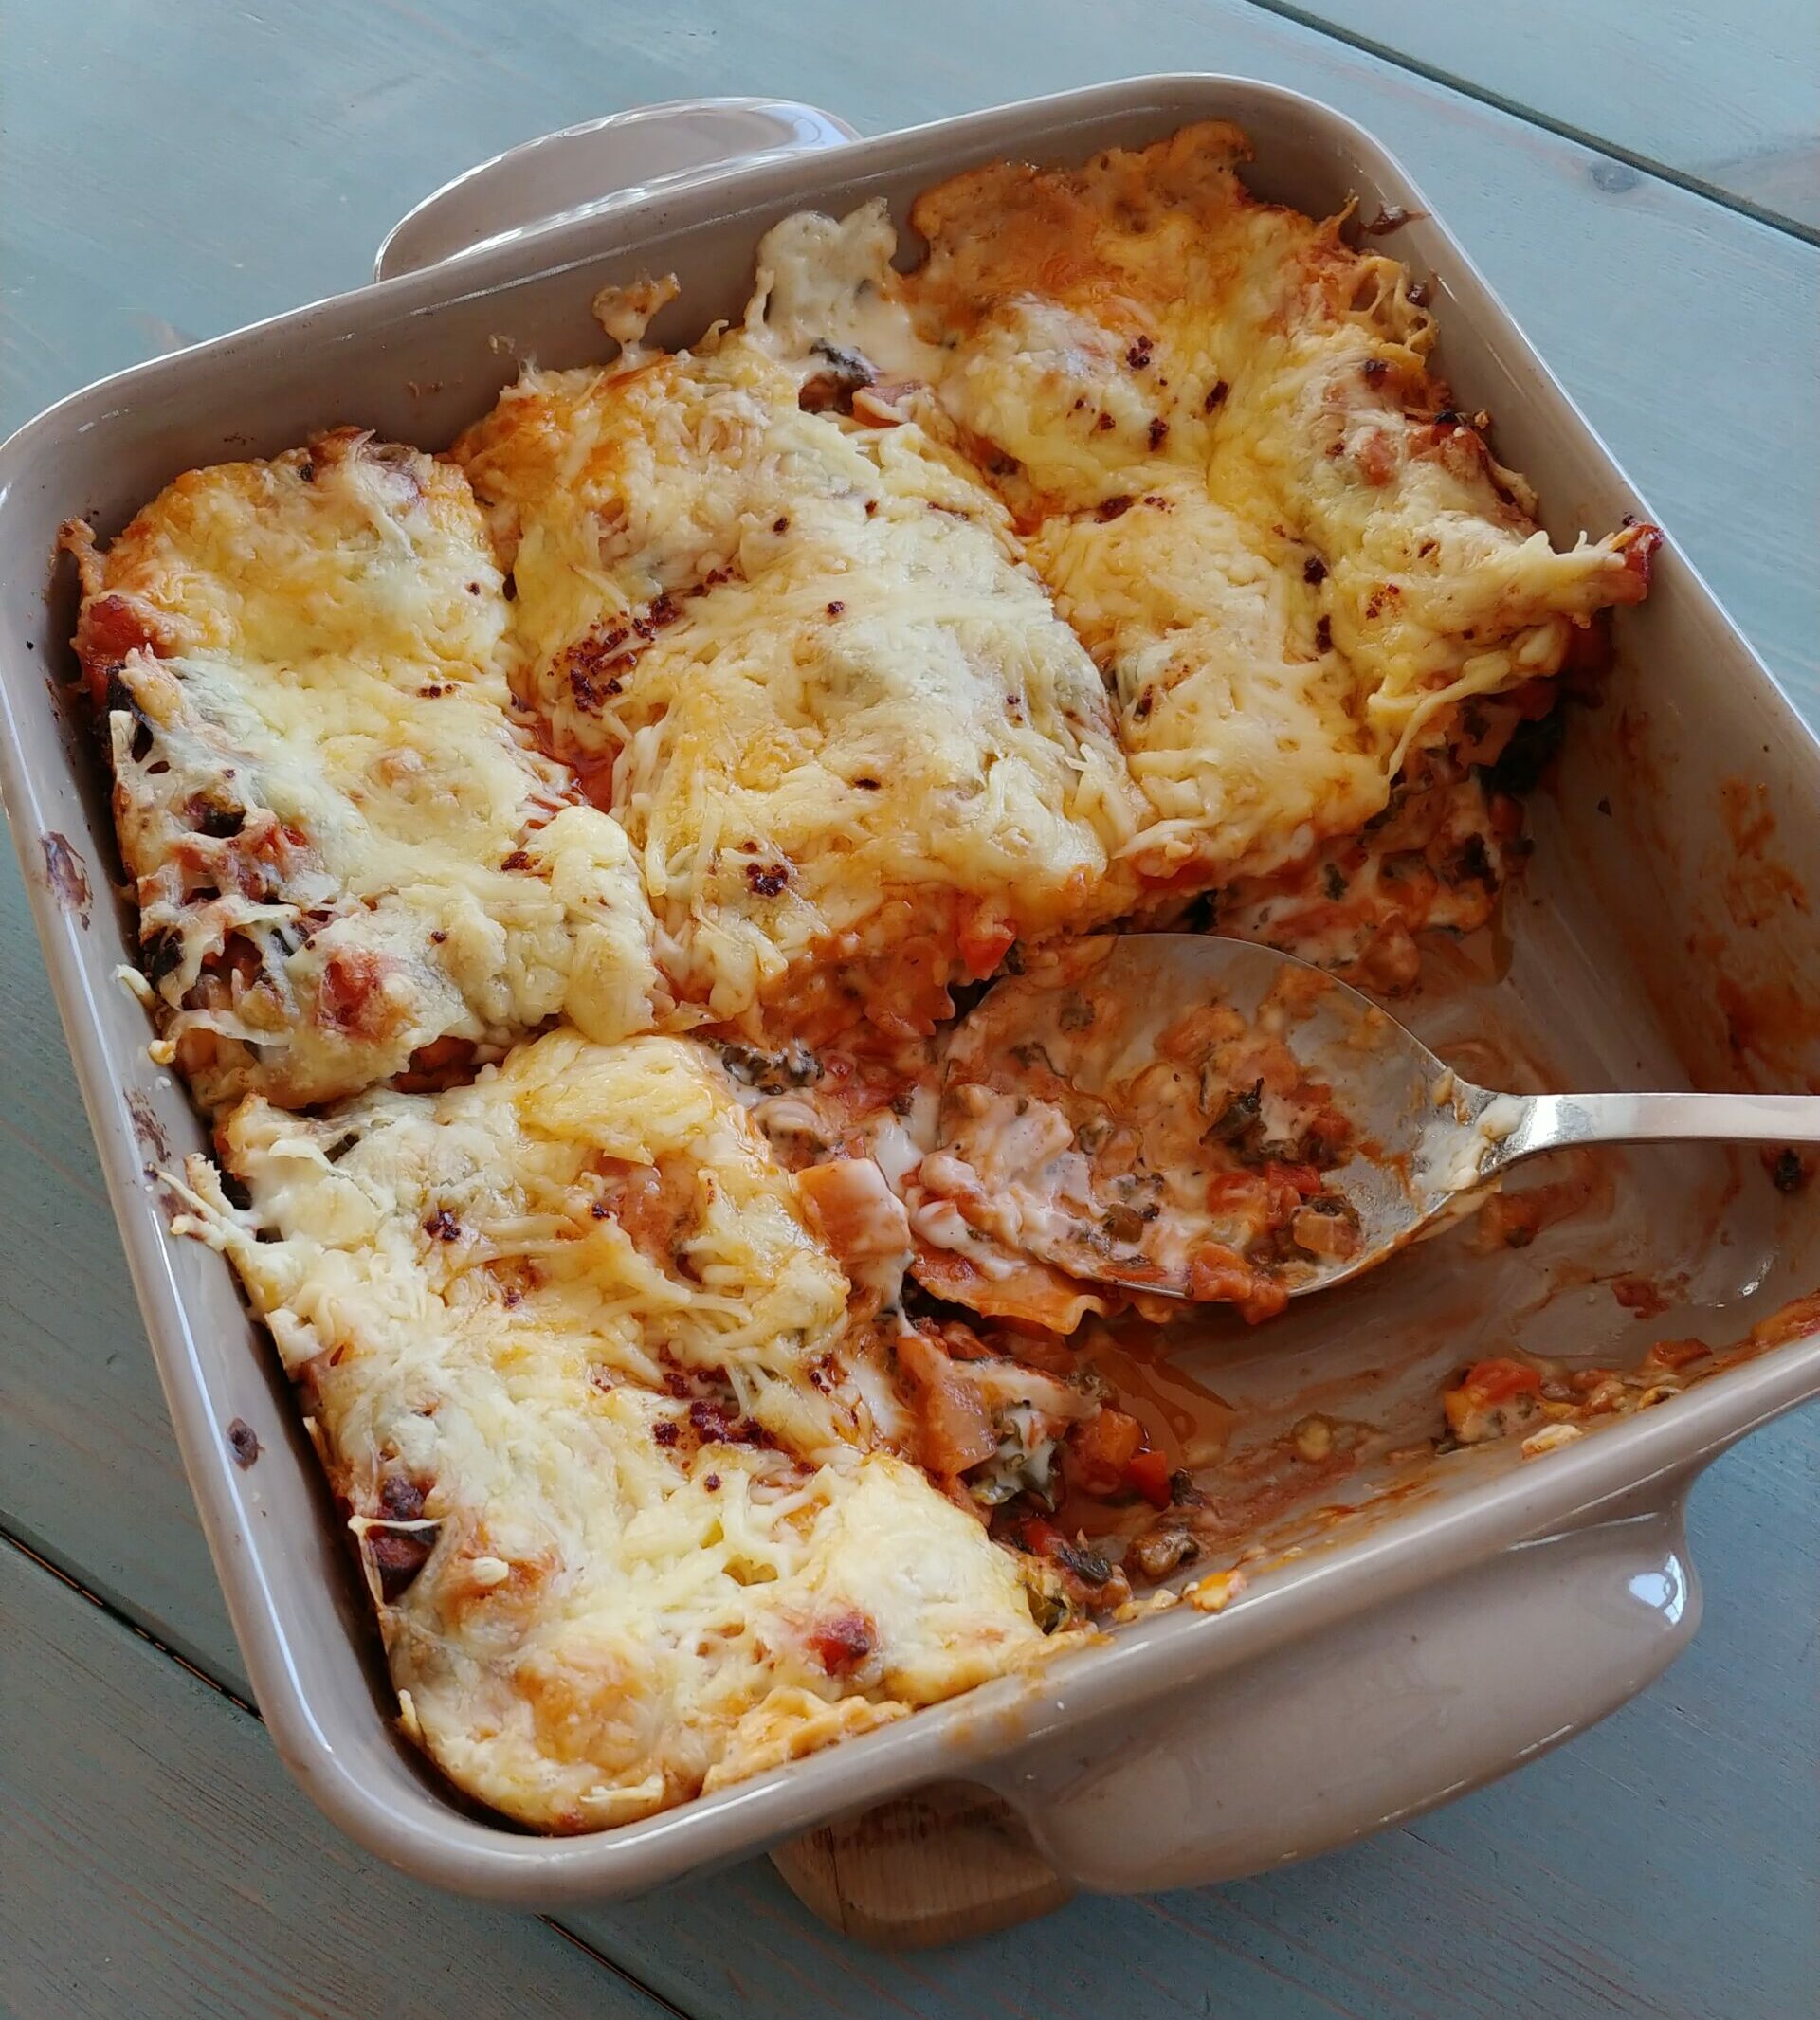 You are currently viewing Winterlasagne mit Grünkohl